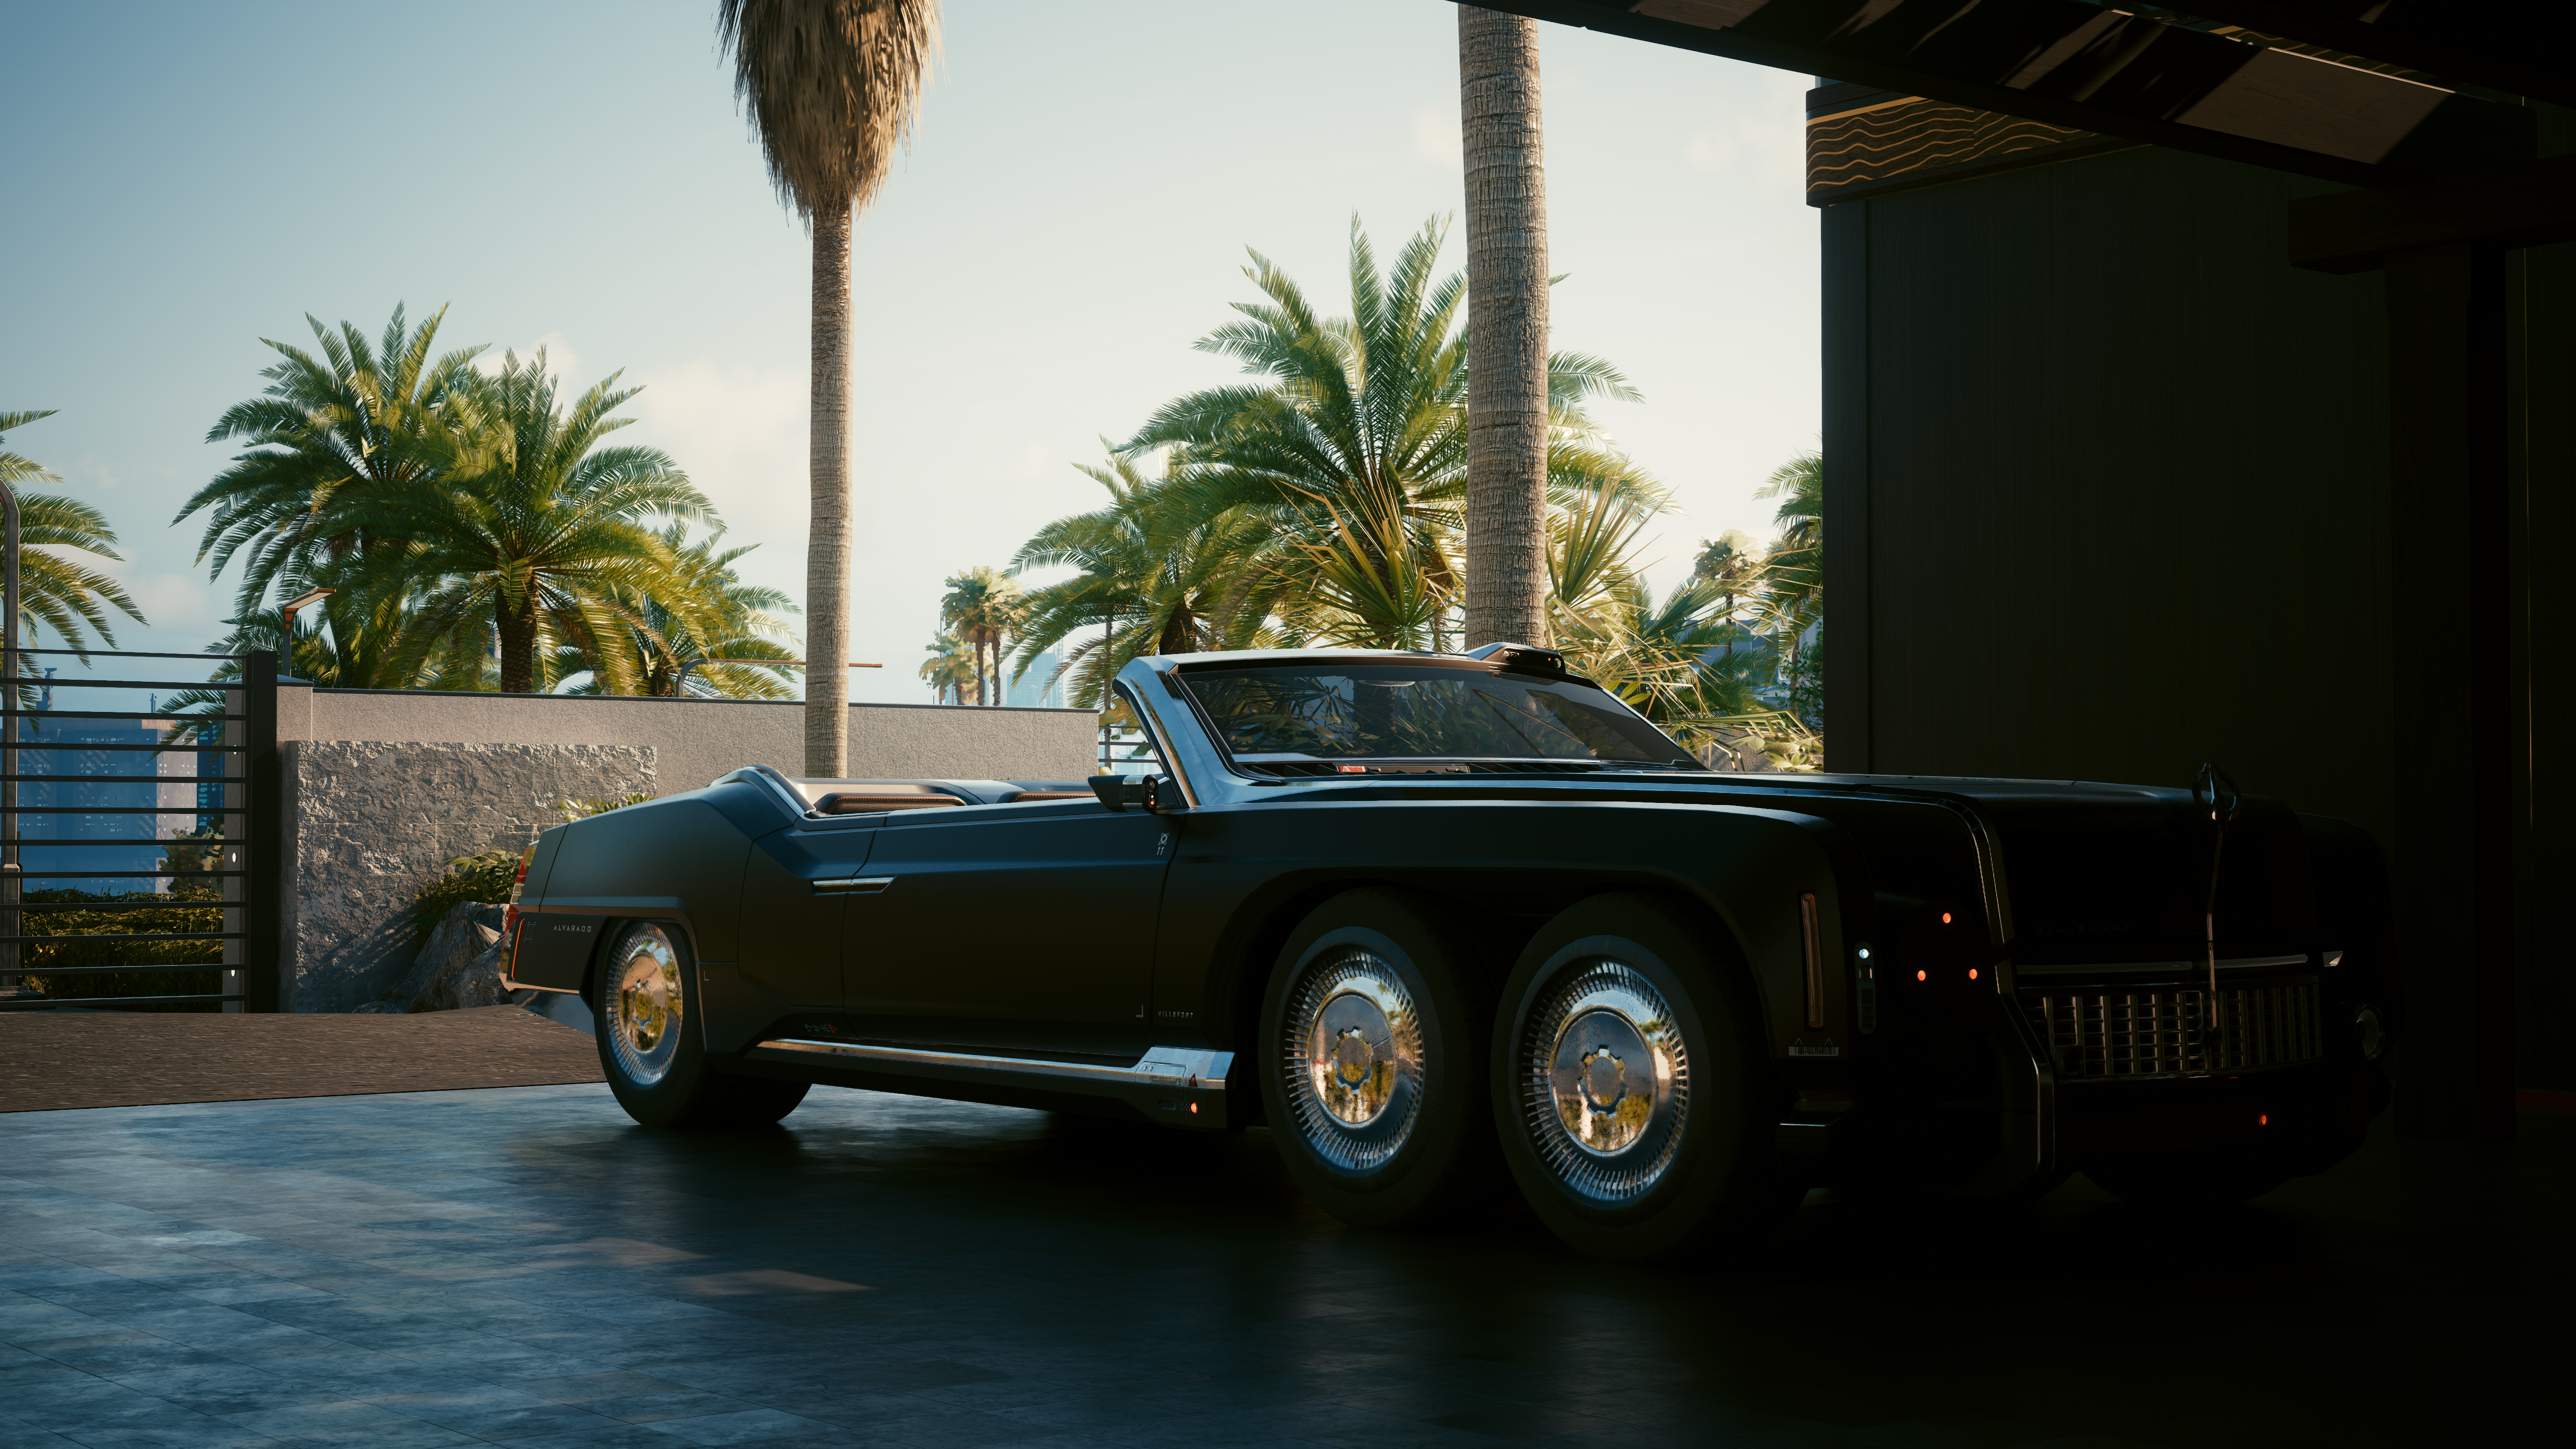 General 5120x2880 Cyberpunk 2077 video games CGI car frontal view palm trees sky clouds